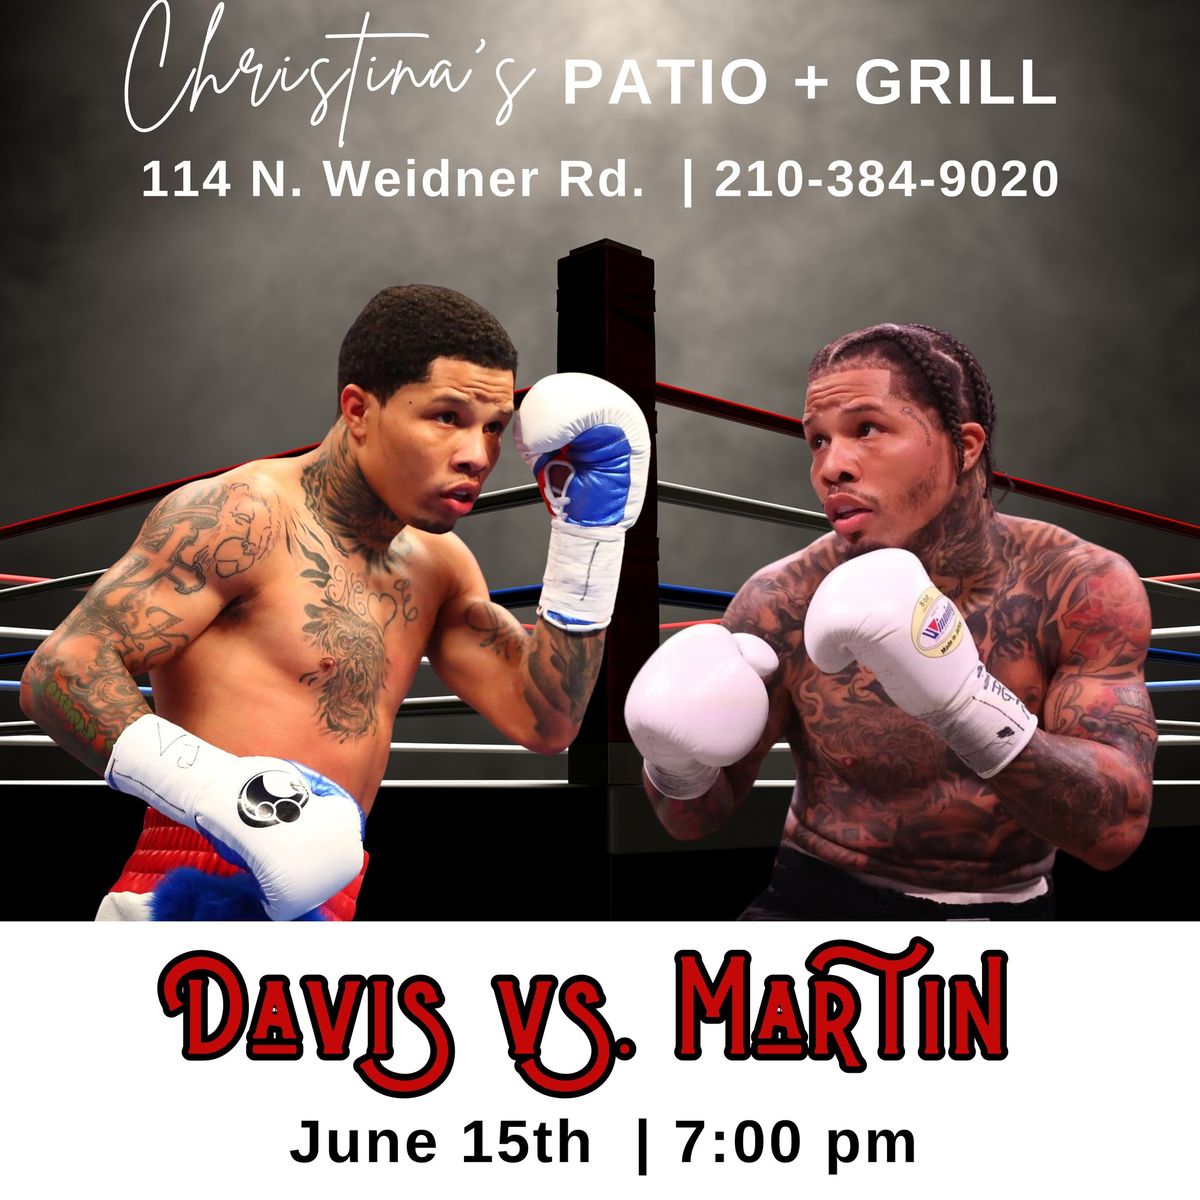 FIGHT NIGHT AT CHRISTINA'S PATIO + GRILL